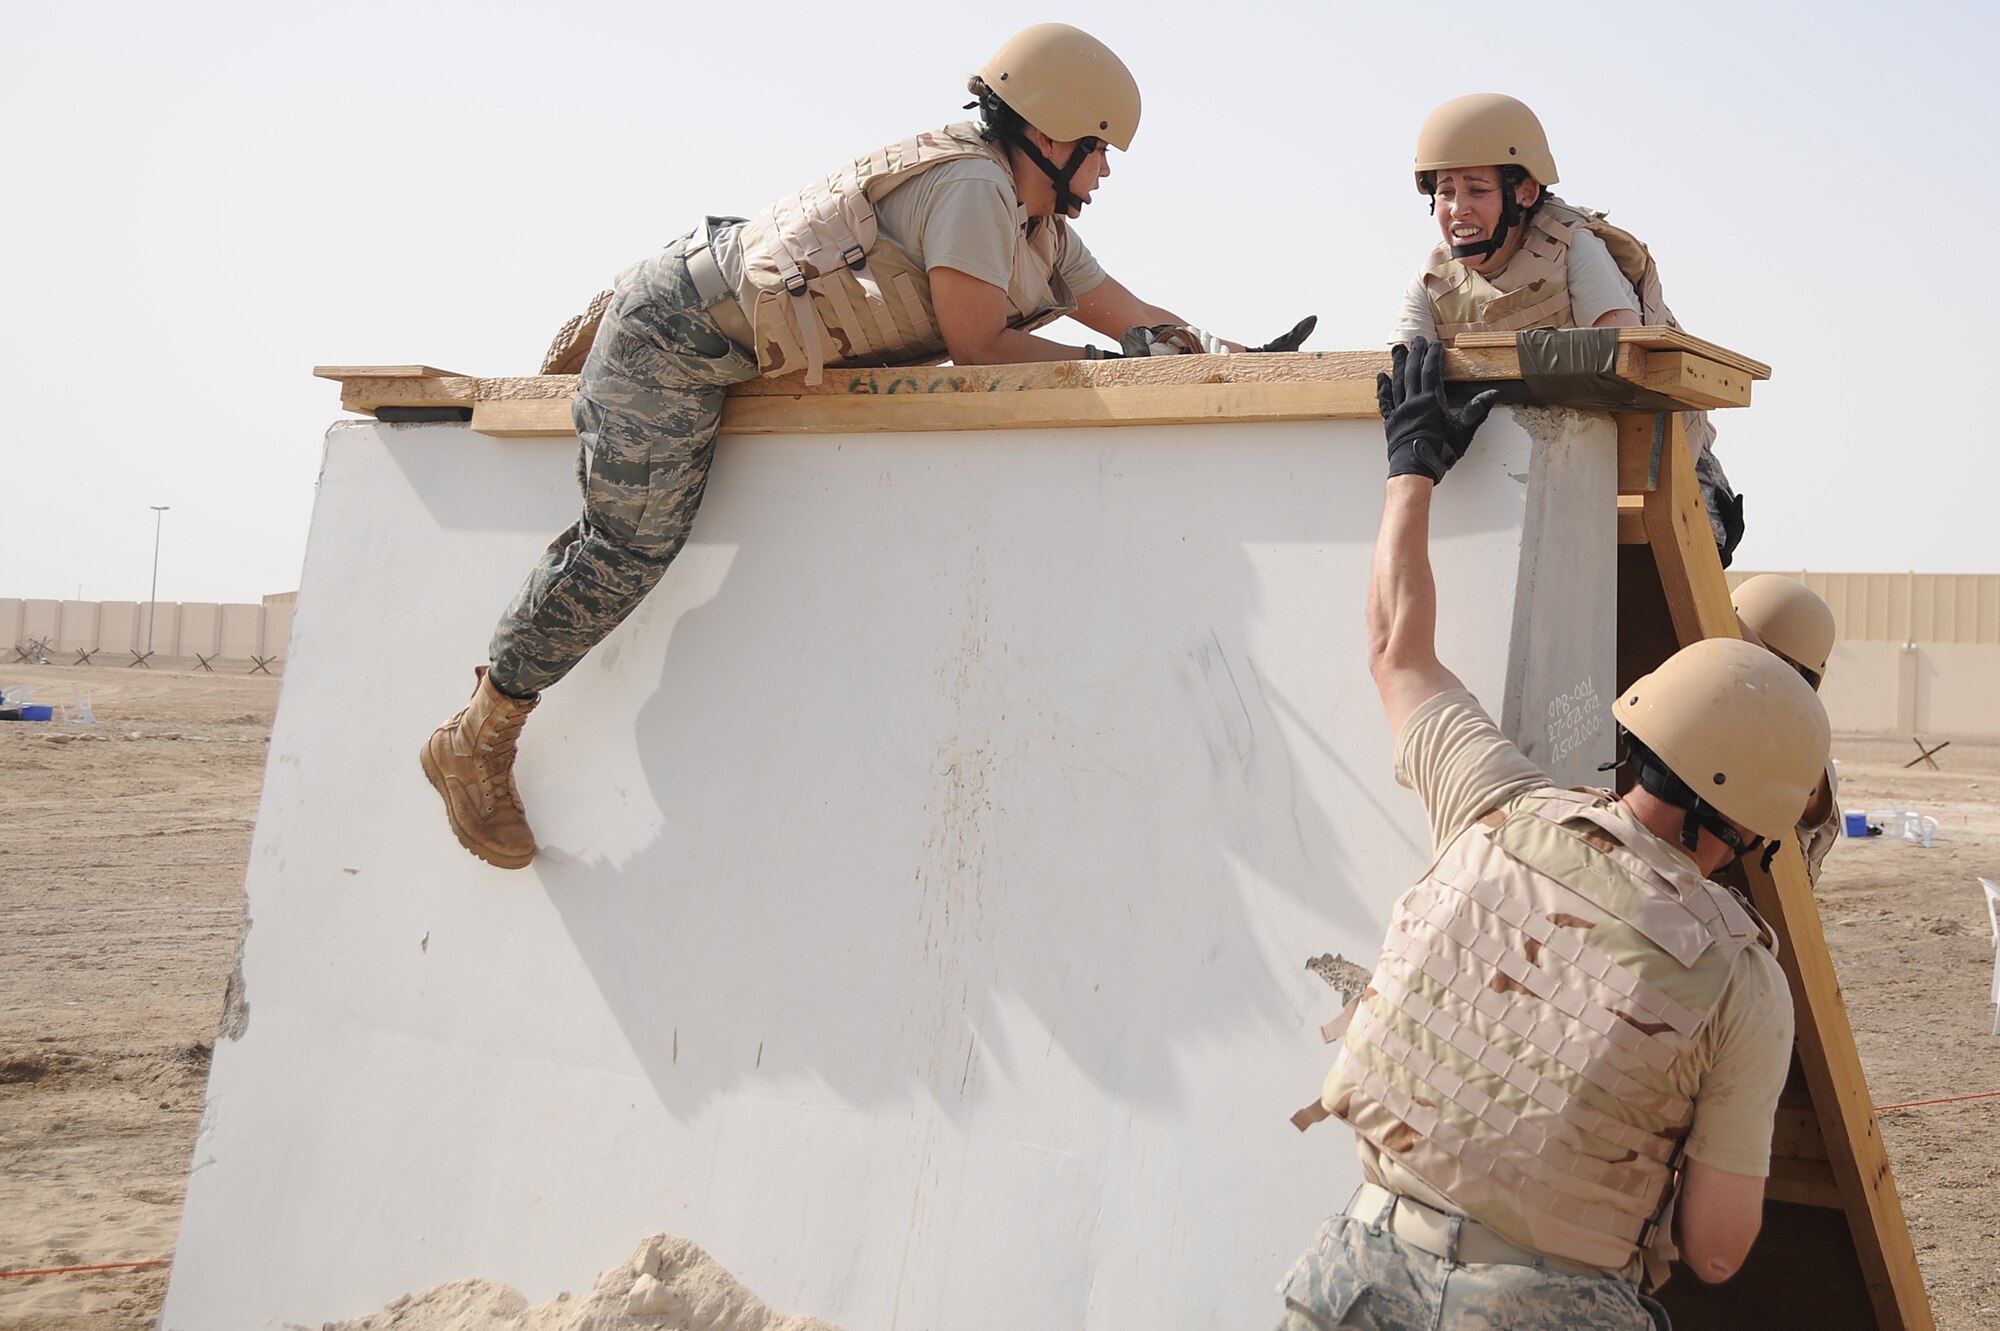 Staff Sgt. Christian Johnson, 380th Expeditionary Mission Support Group, lends a hand to 1st Lt. Miranda Thompson, 380th EMSG, as they use a rope to climb a wall on a Defender Challenge course, April 25 at an undisclosed location in Southwest Asia. Teams from different units ran the course, testing stamina, strength and brain power. Sergeant Johnson is deployed from Tyndall AFB, Fla. and hails from Brownsville, Texas. Lieutenant Thompson is deployed from Malmstrom AFB, Mont. and hails from Fleshing, Ohio. (U.S. Air Force photo by Senior Airman Brian J. Ellis) (Released)